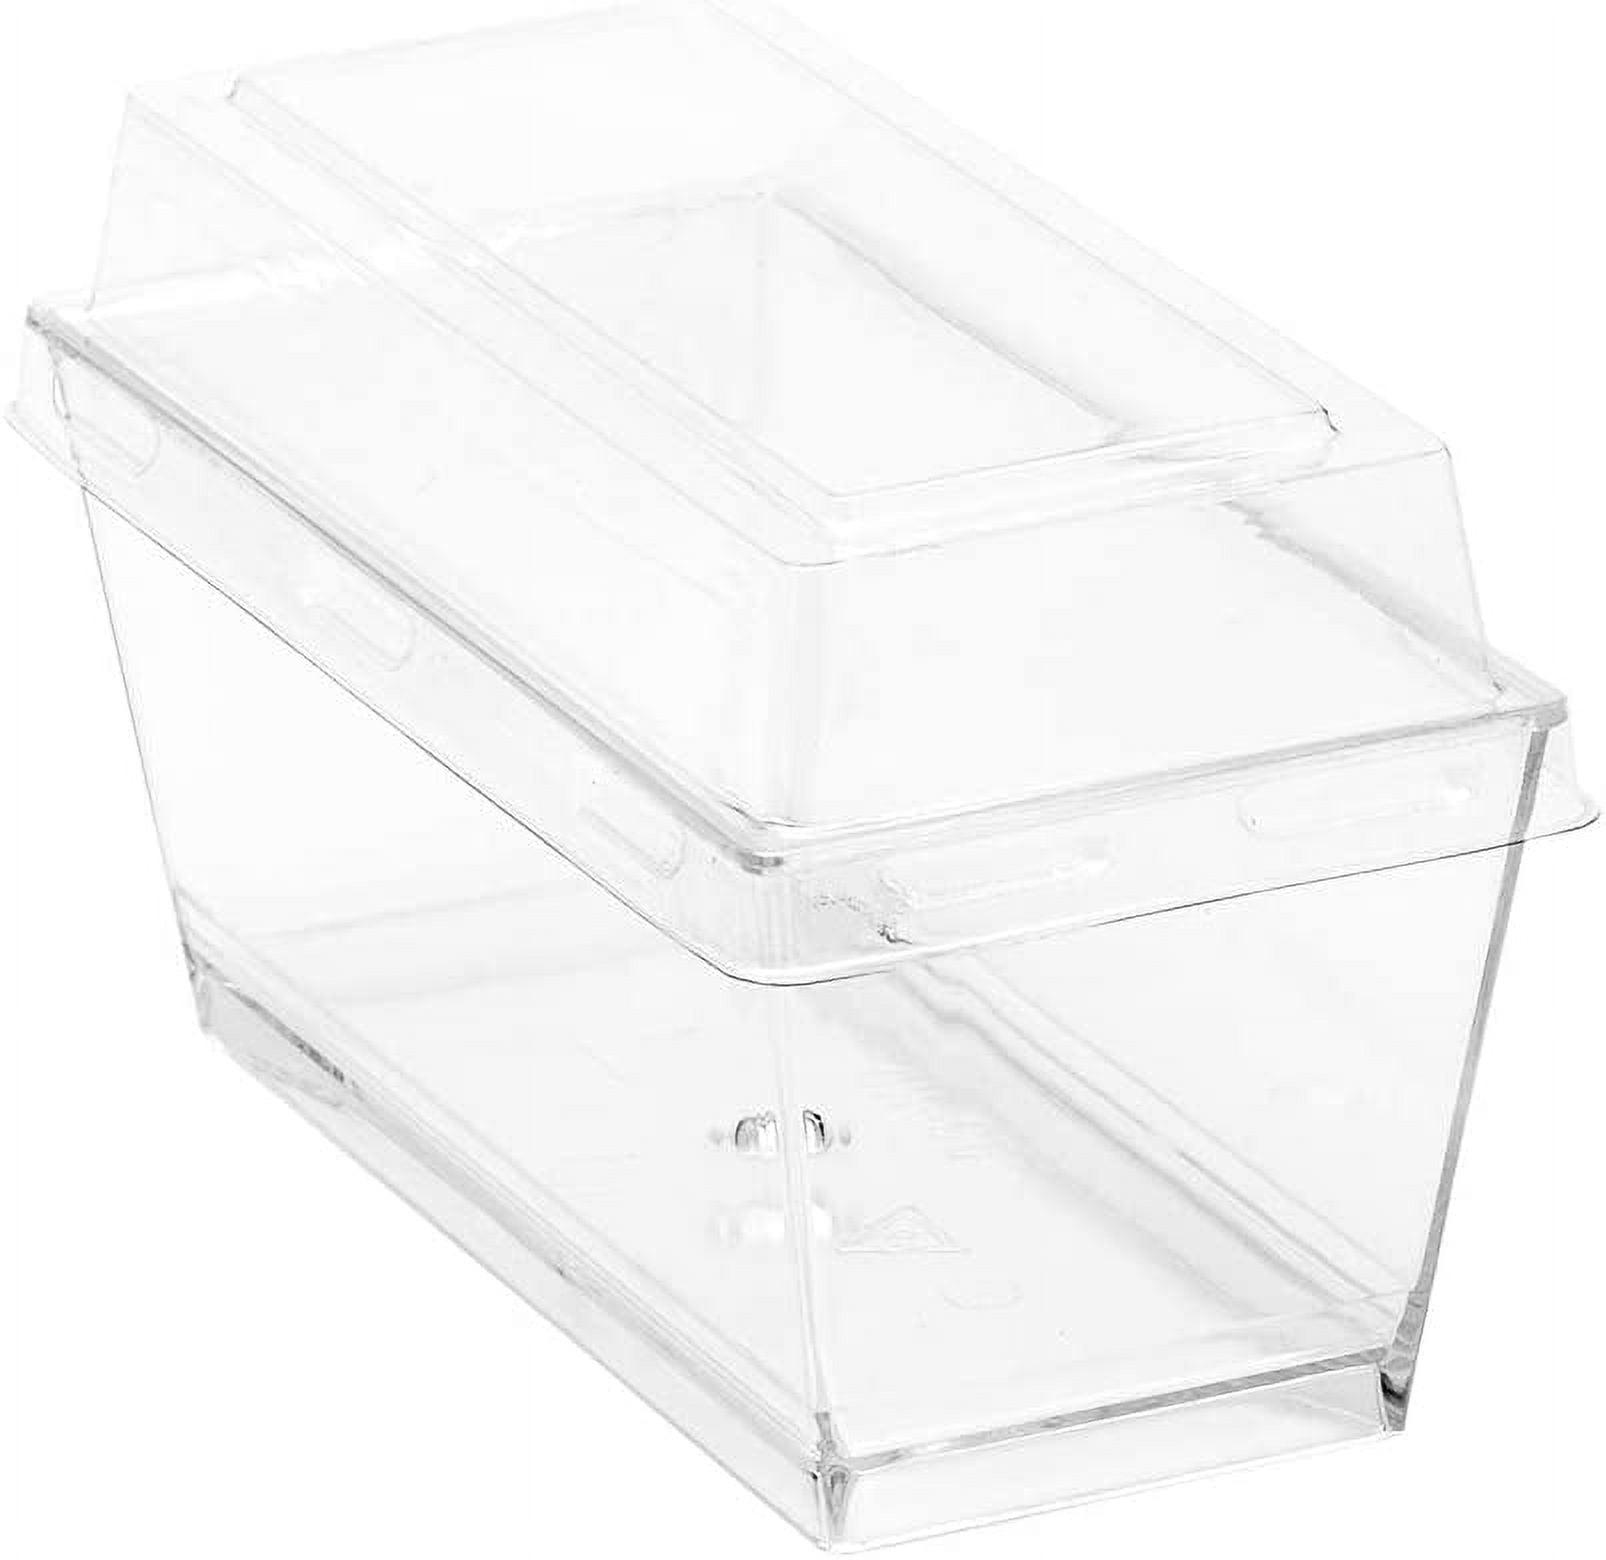 The Container Store 1.4 Quarts 1.3 Liter Rectangular Food Storage - Crystal Clear - 8 x 5-1/2 x 2-1/2 H - Each